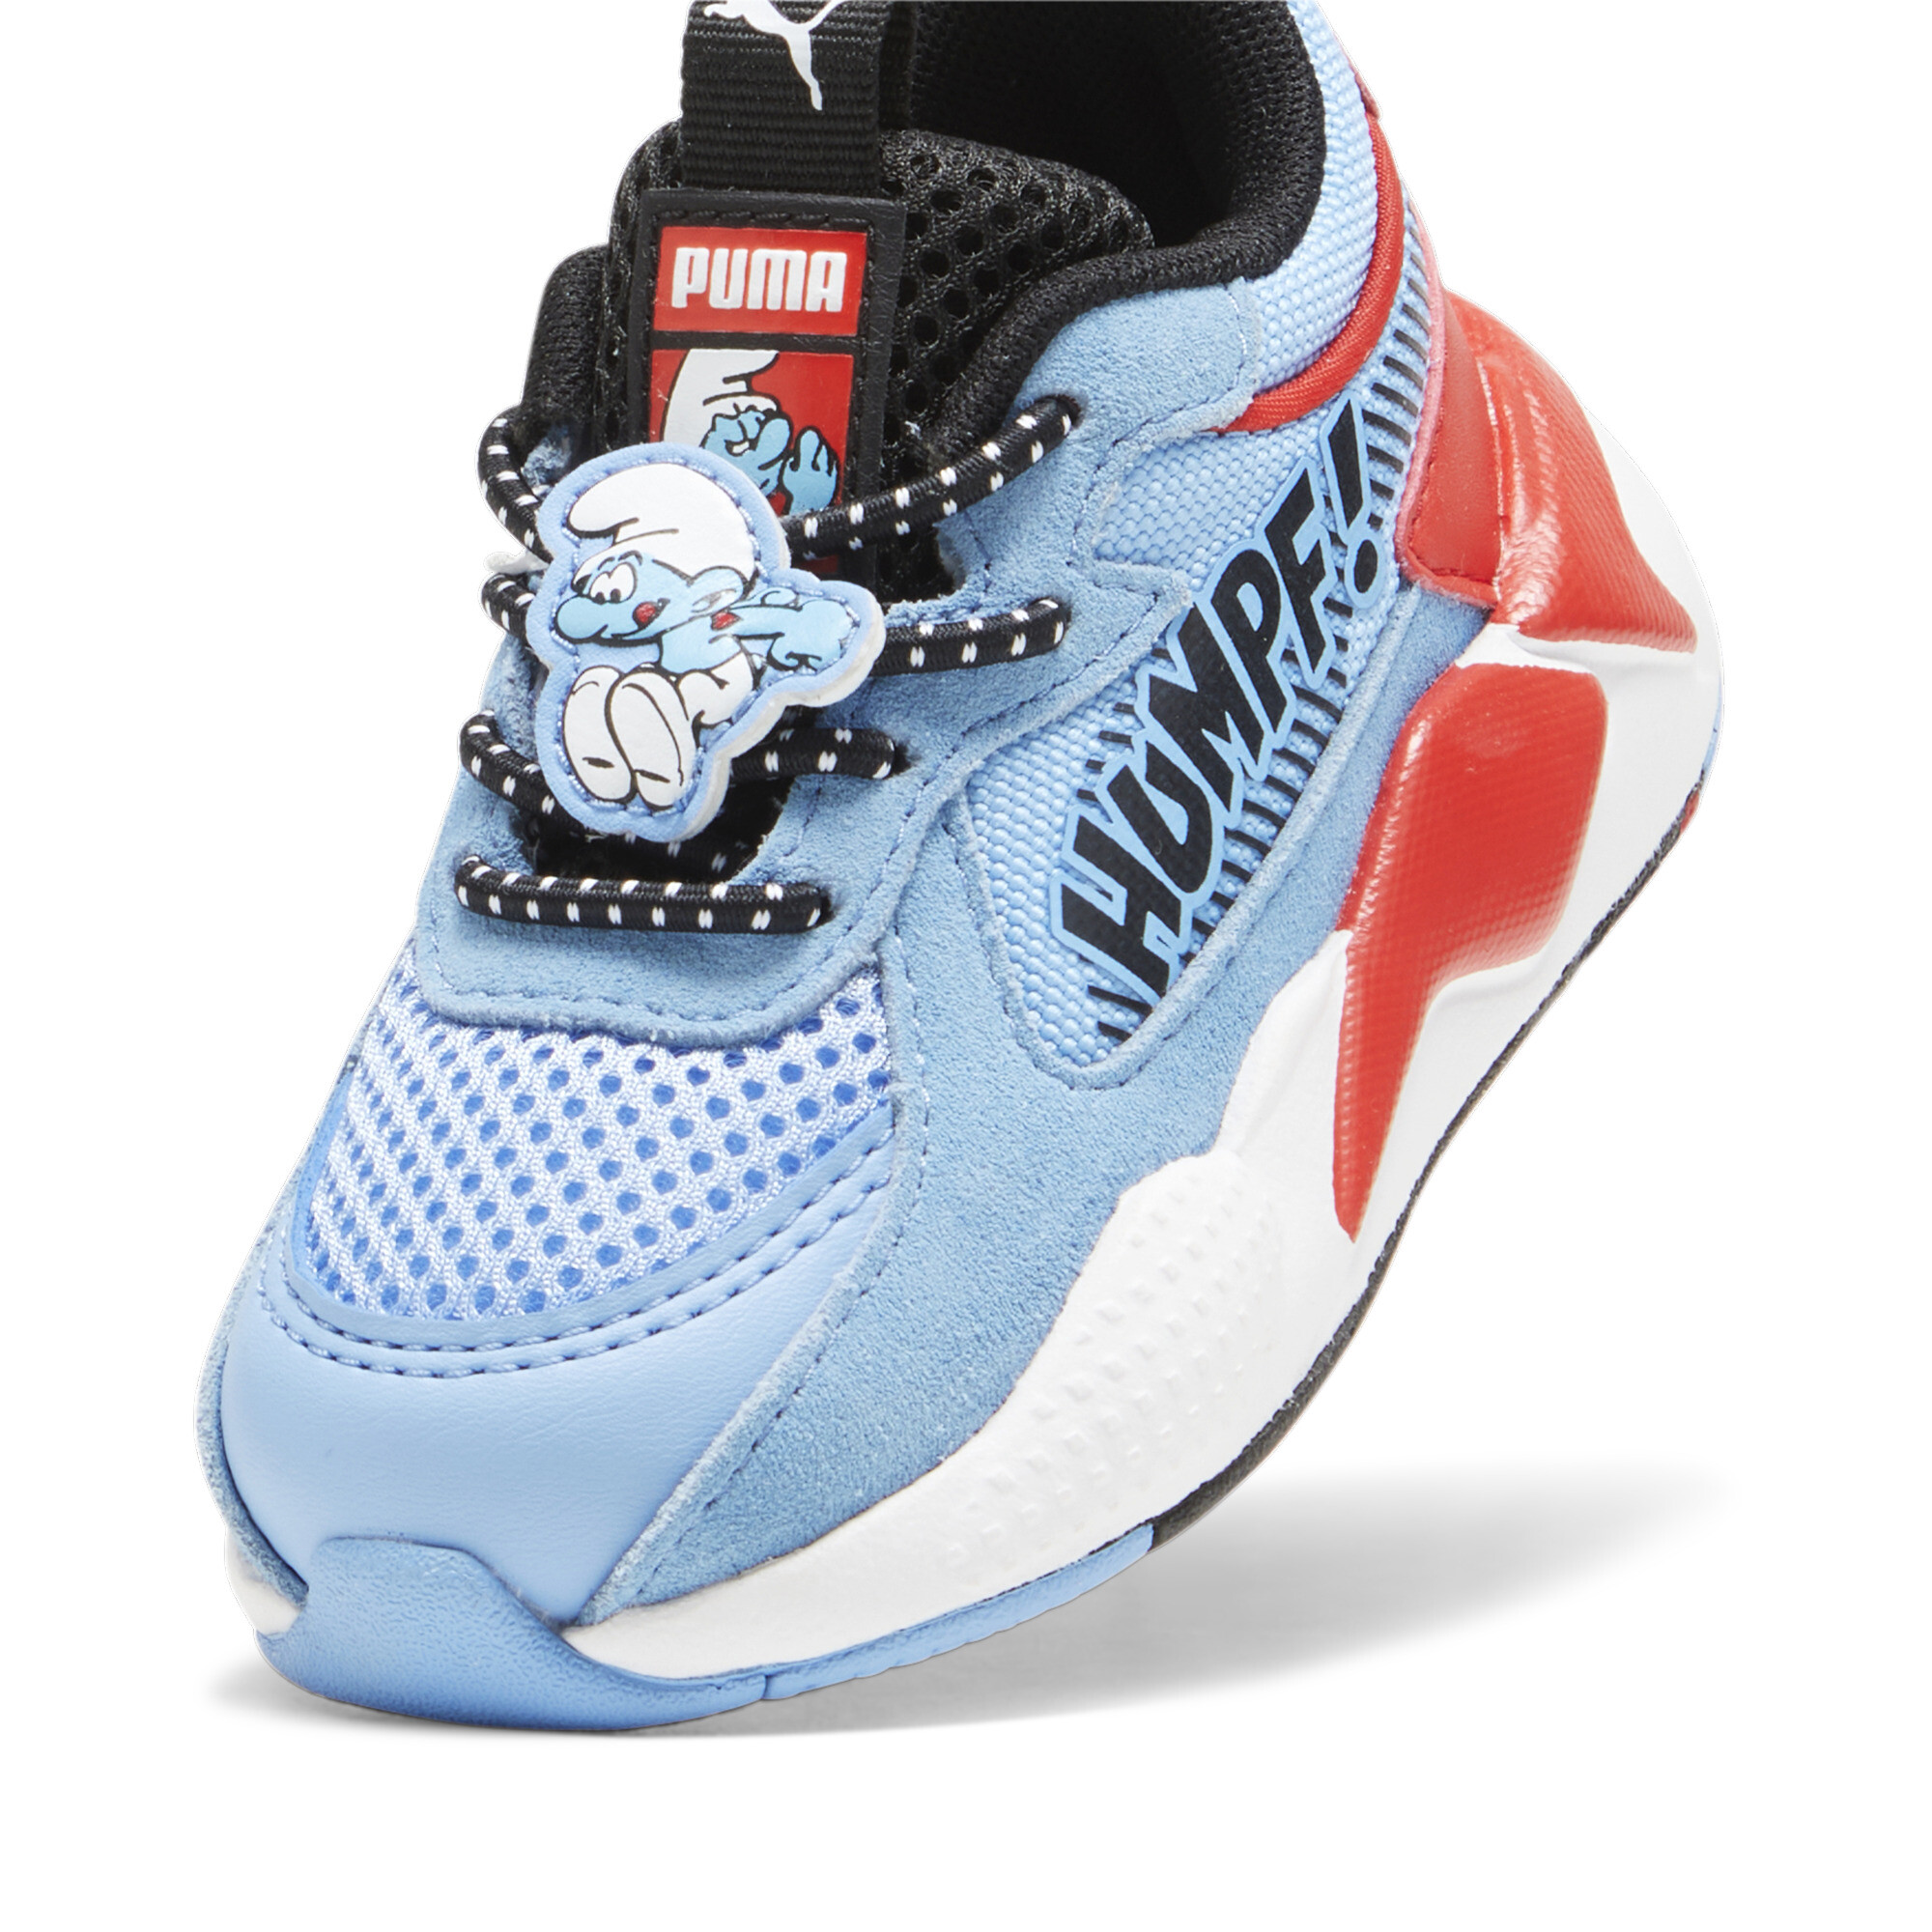 Kids' PUMA X THE SMURFS RS-X Toddlers' Sneakers In Blue, Size EU 22